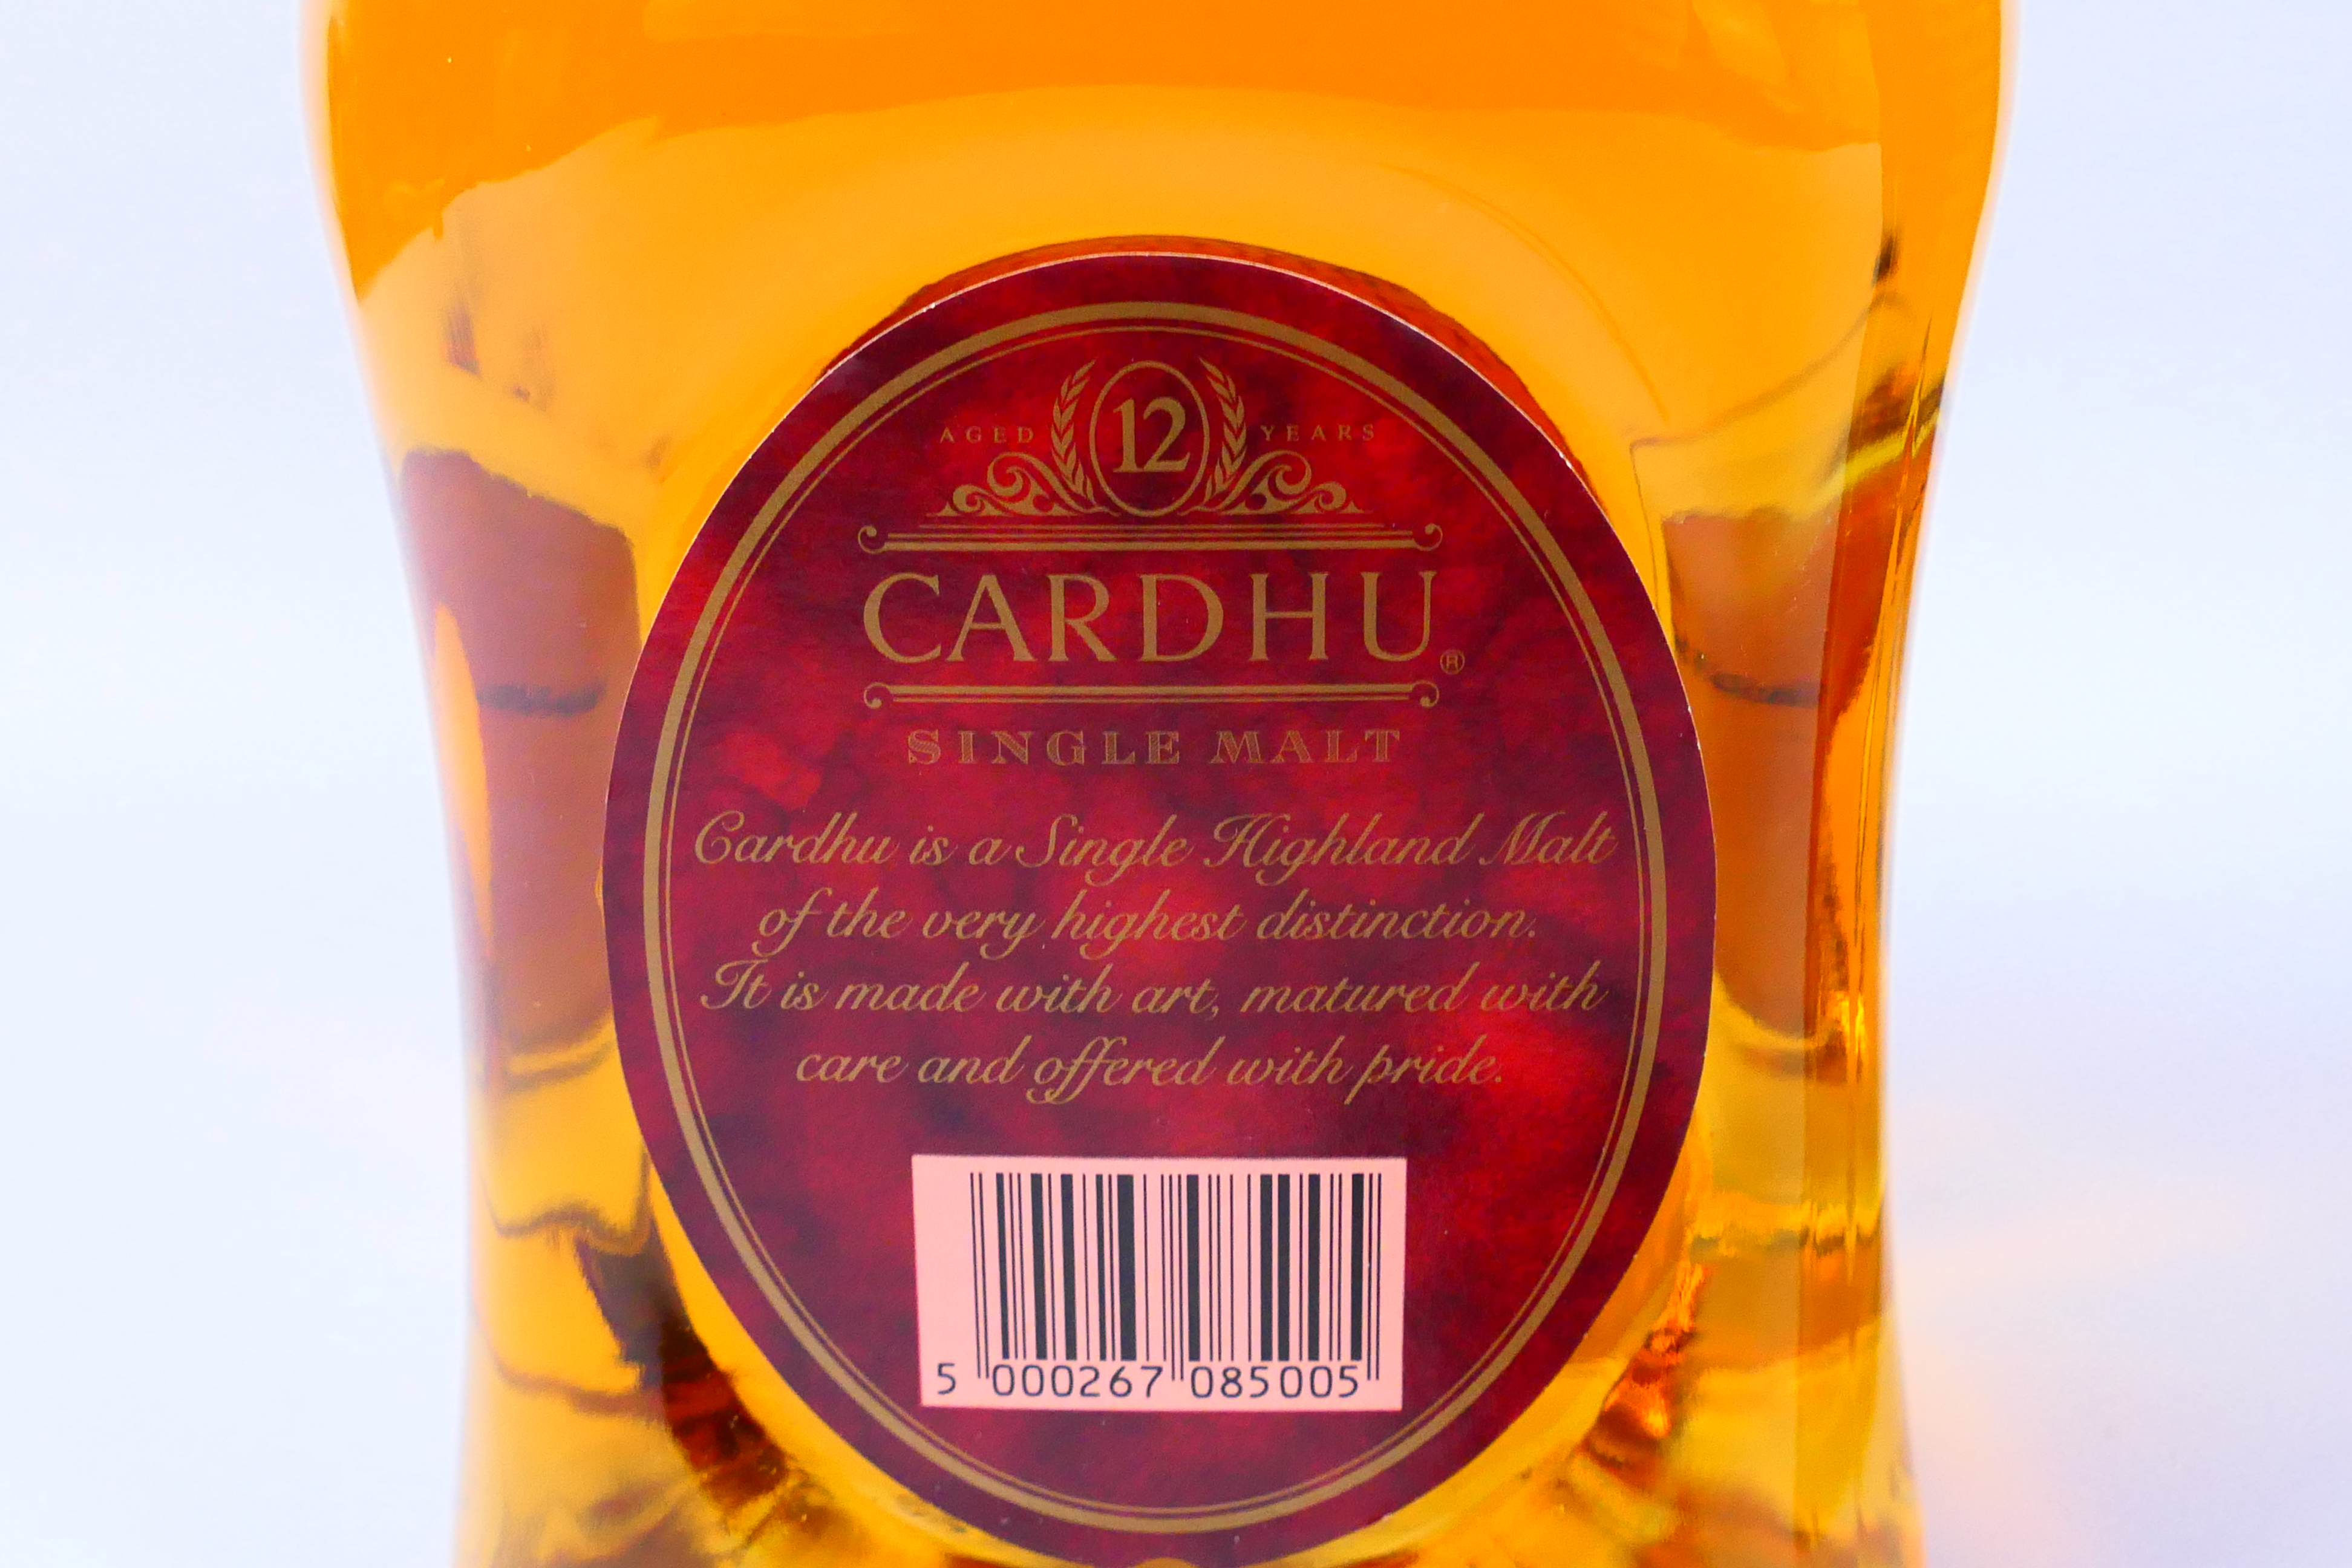 A 1l bottle of Cardhu 12 Year Old single malt whisky, 40% abv, boxed. - Image 5 of 6